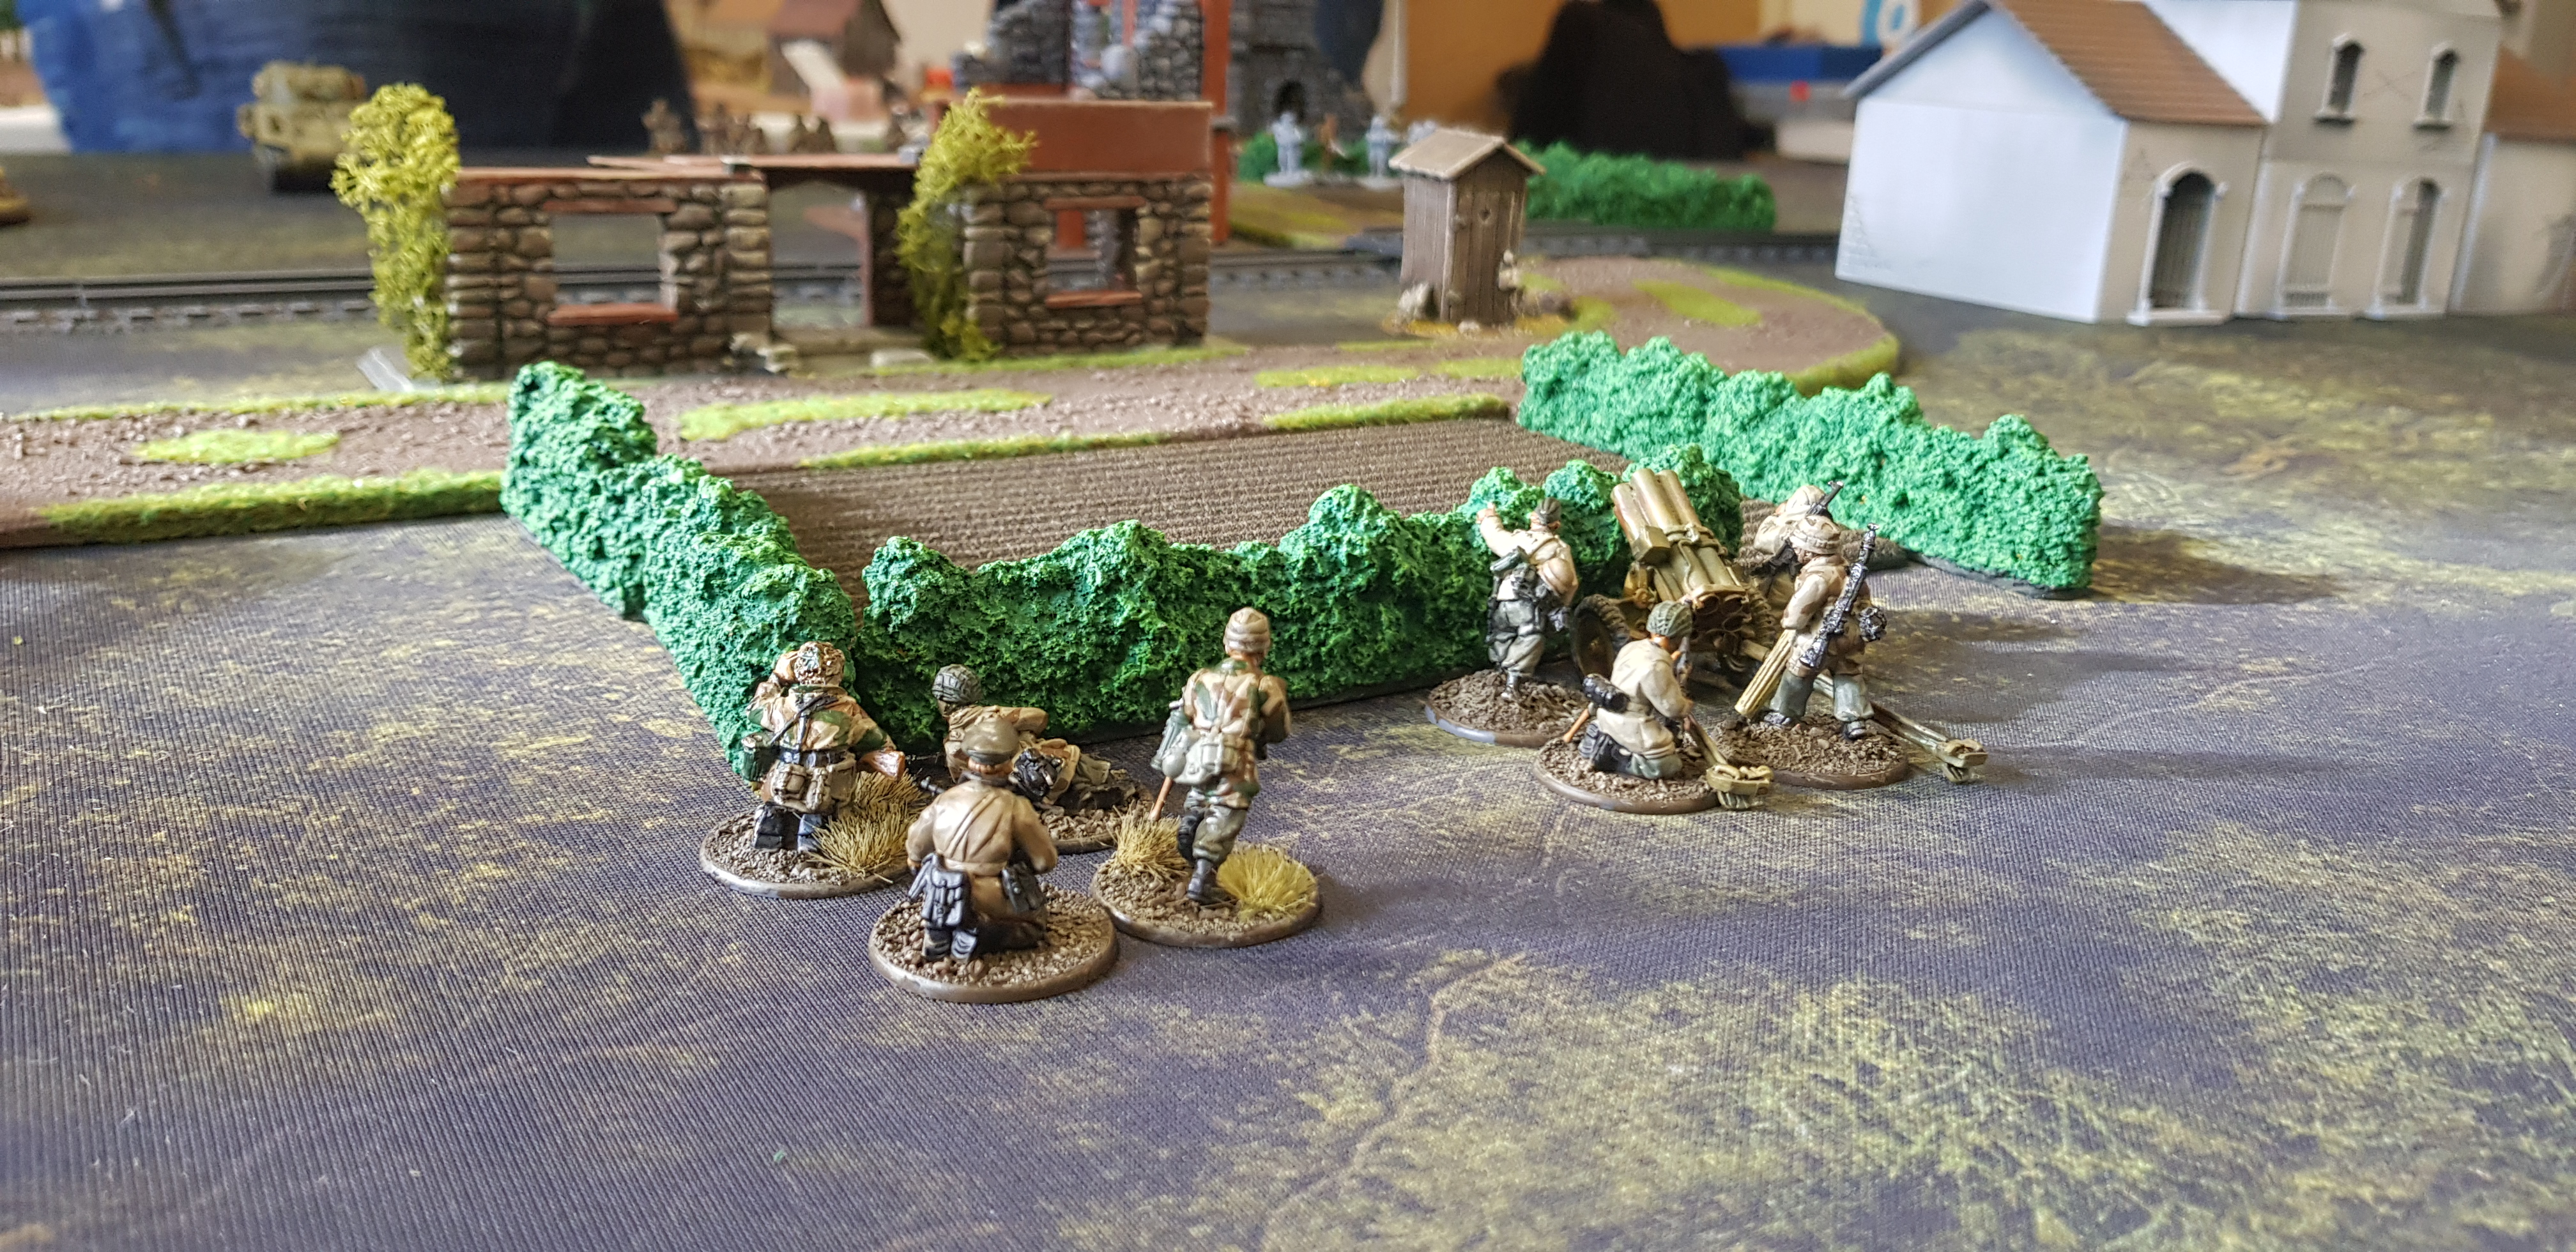 3FJD versus Northamptonshire Yeomanry in a fierce infantry engagement